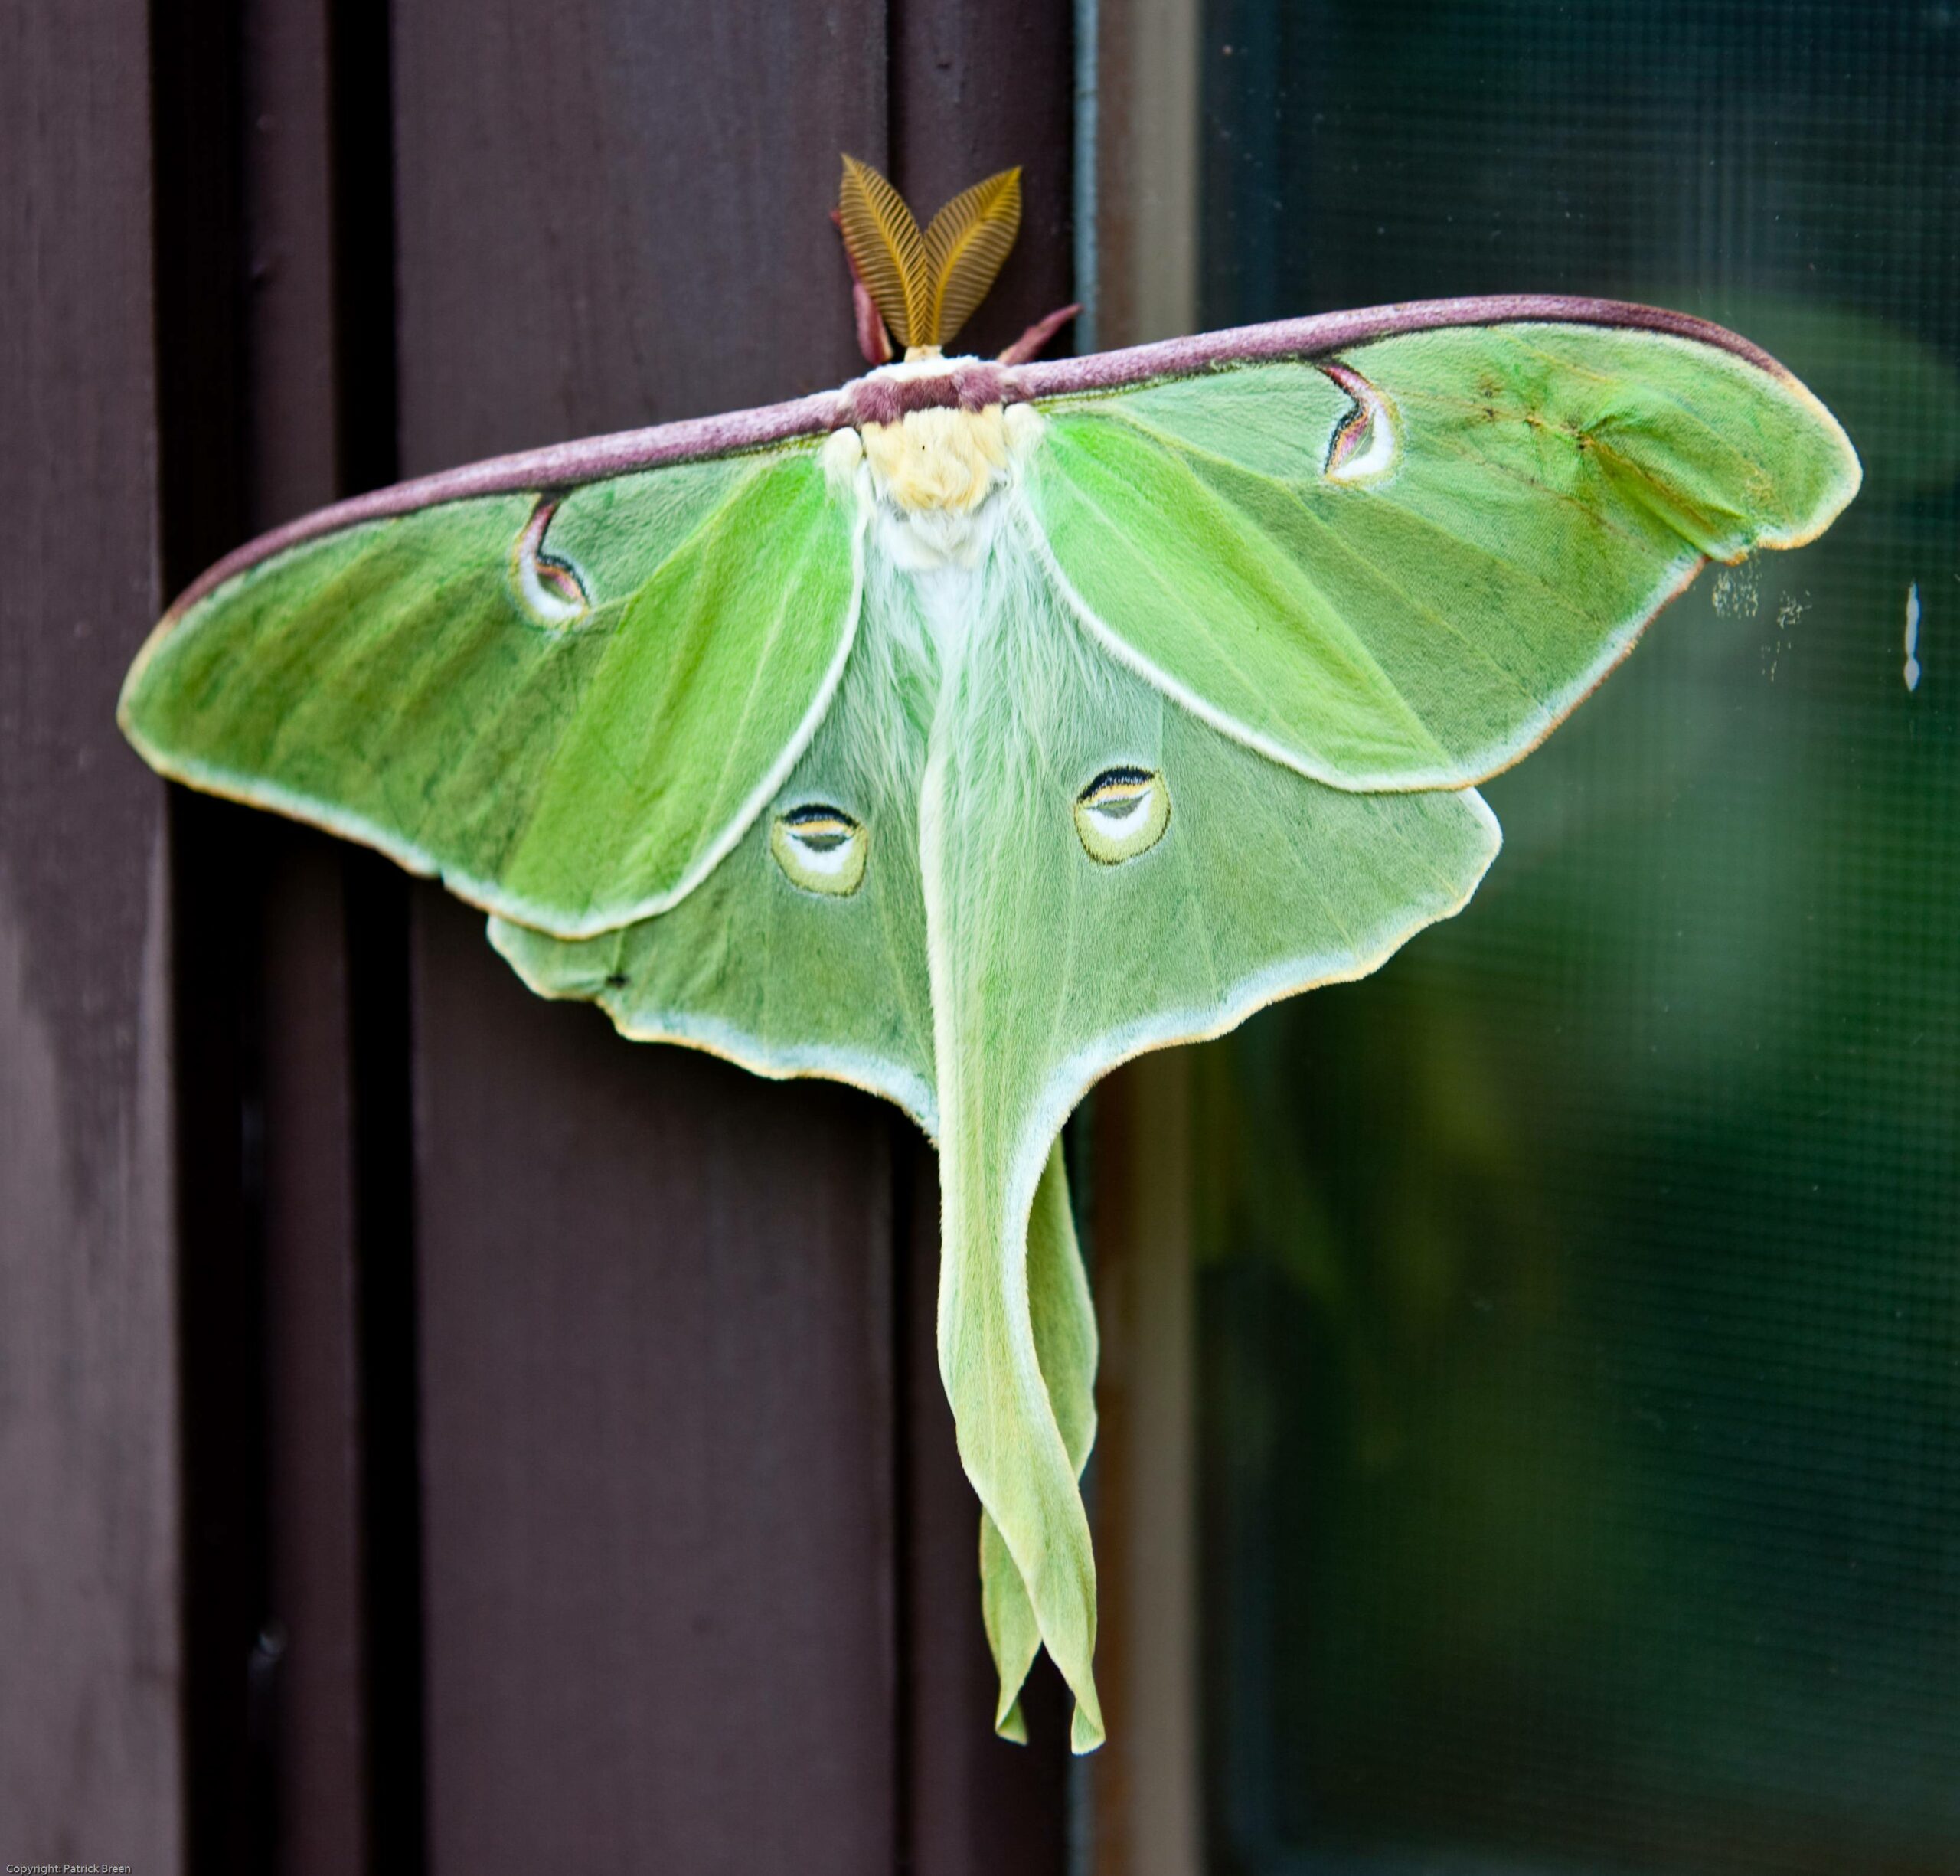 Long Tails May Save Luna Moths From Hungry Bats [Video]